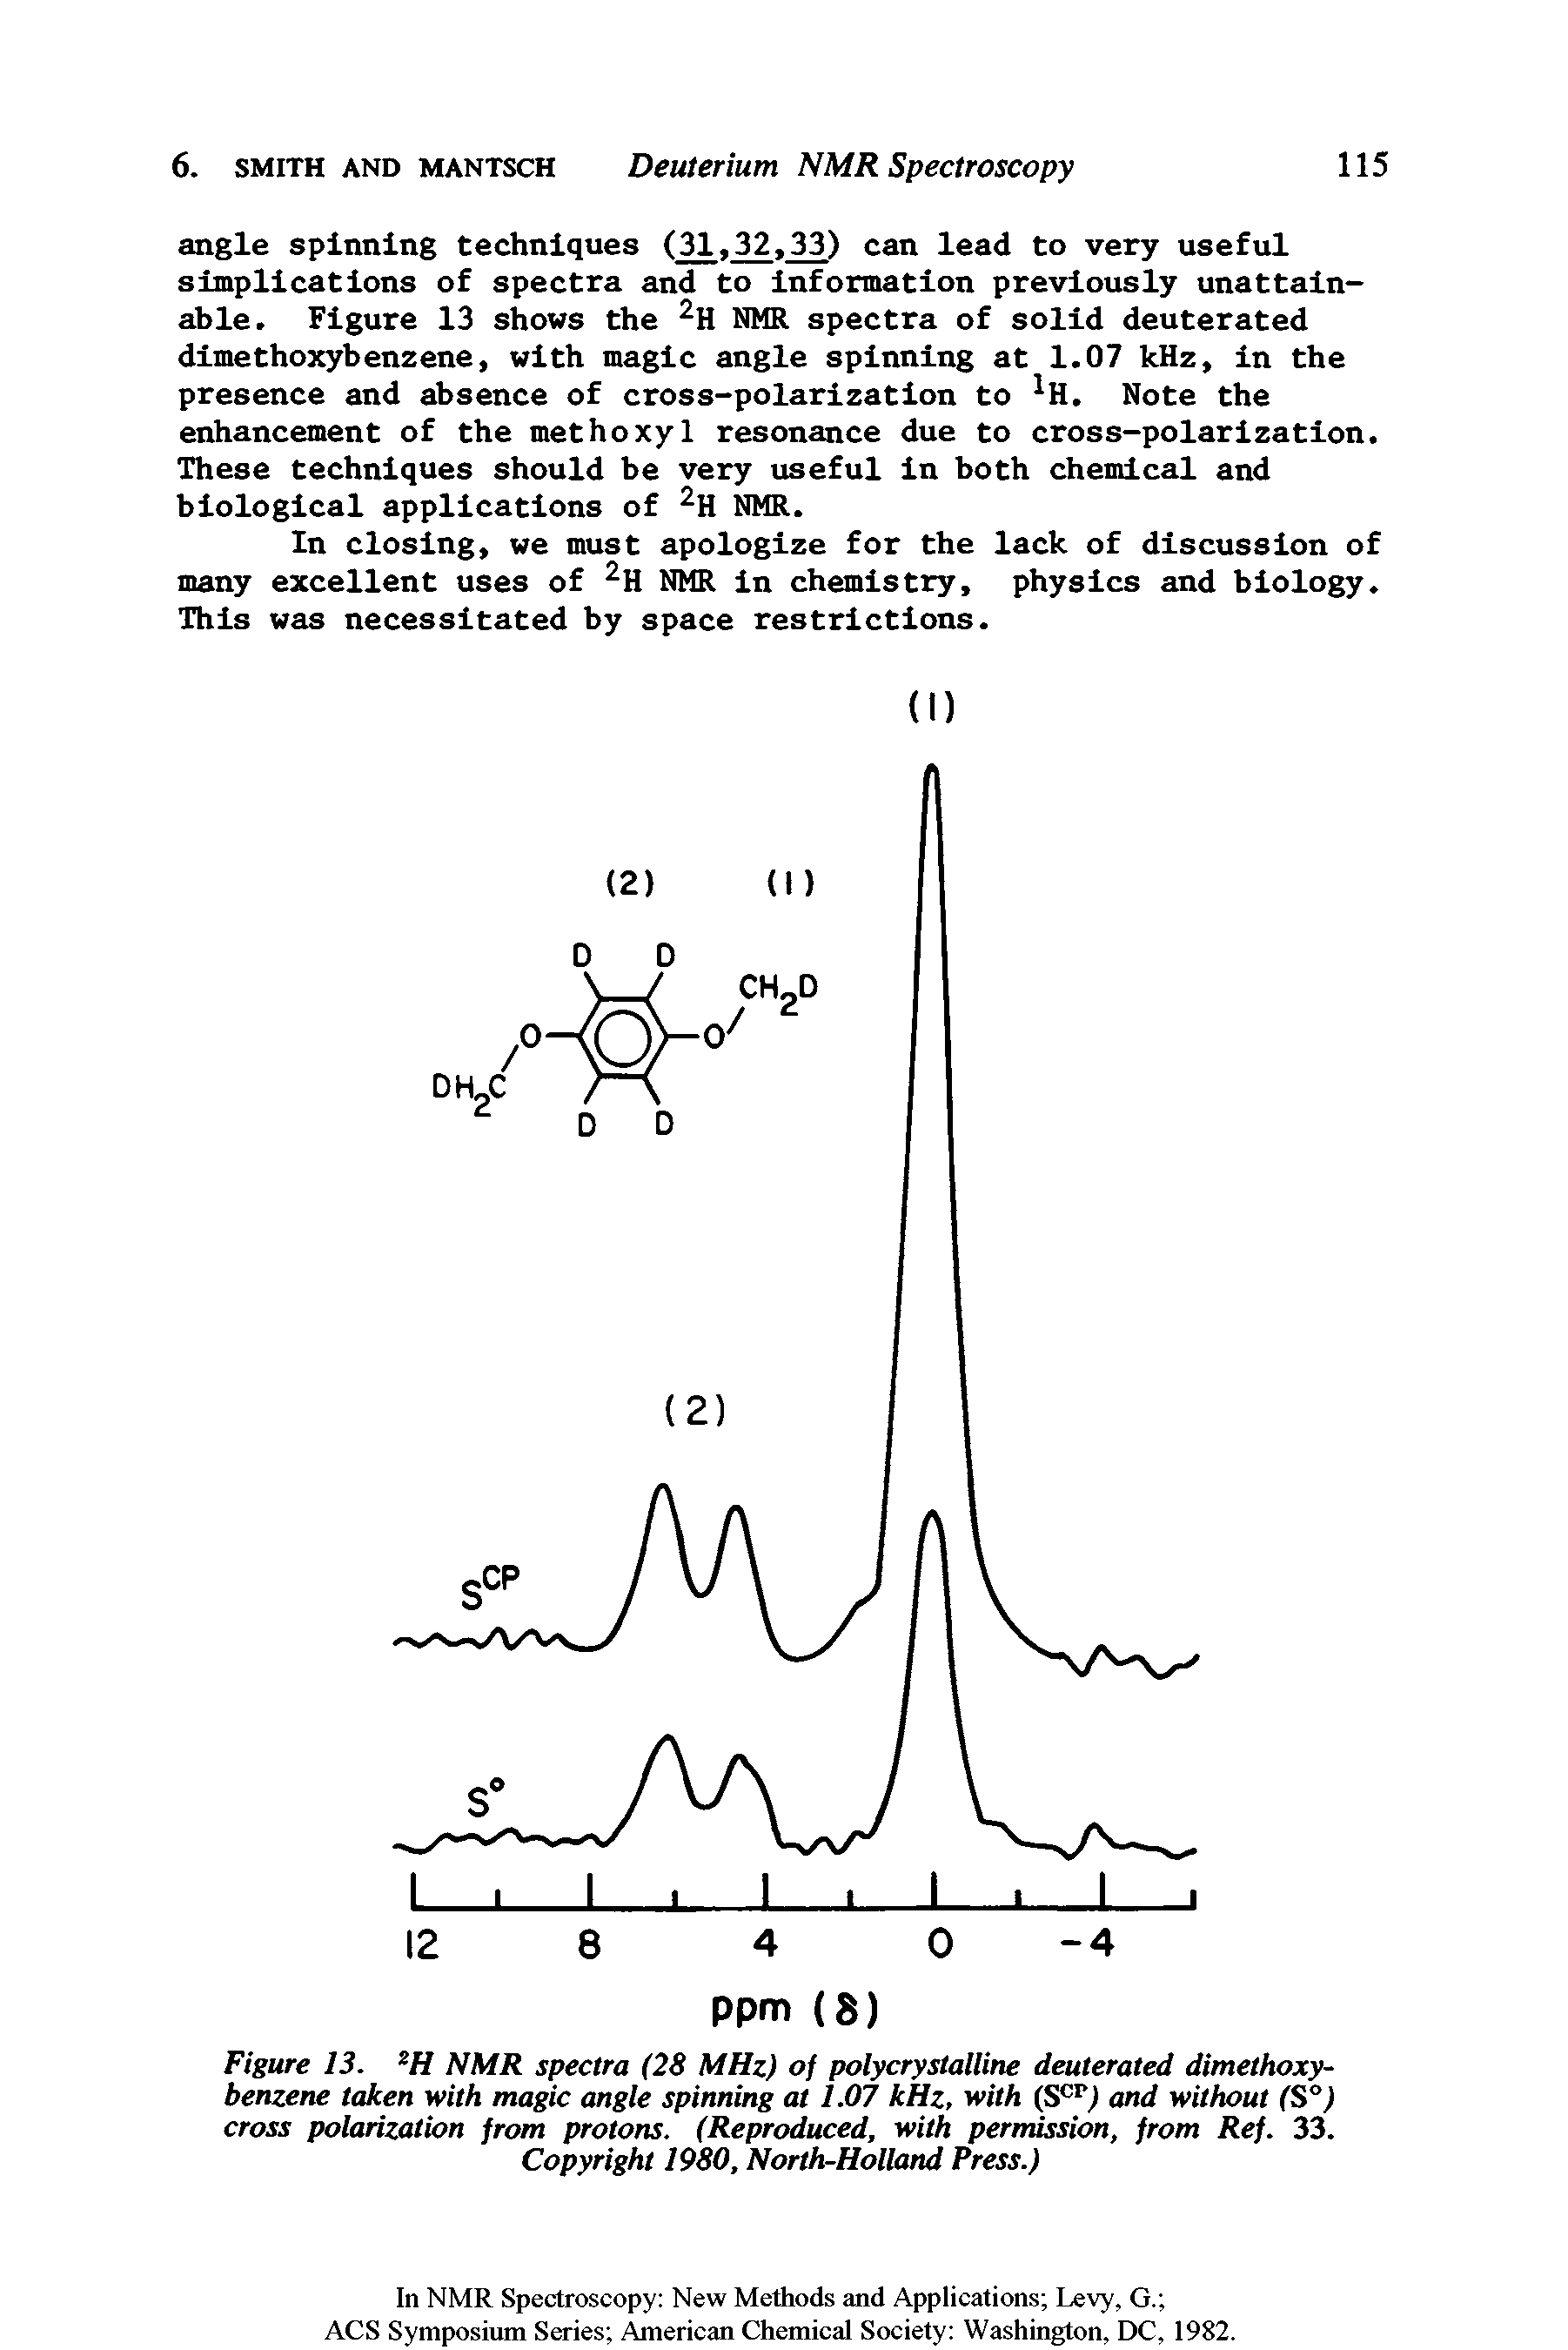 Figure 13. NMR spectra (28 MHz) of polycrystalline deuterated dimethoxy-benzene taken with magic angle spinning at 1.07 kHz, with (S ) and without (S°) cross polarization from protons. (Reproduced, with permission, from Ref. 33. Copyright 1980, North Holland Press.)...